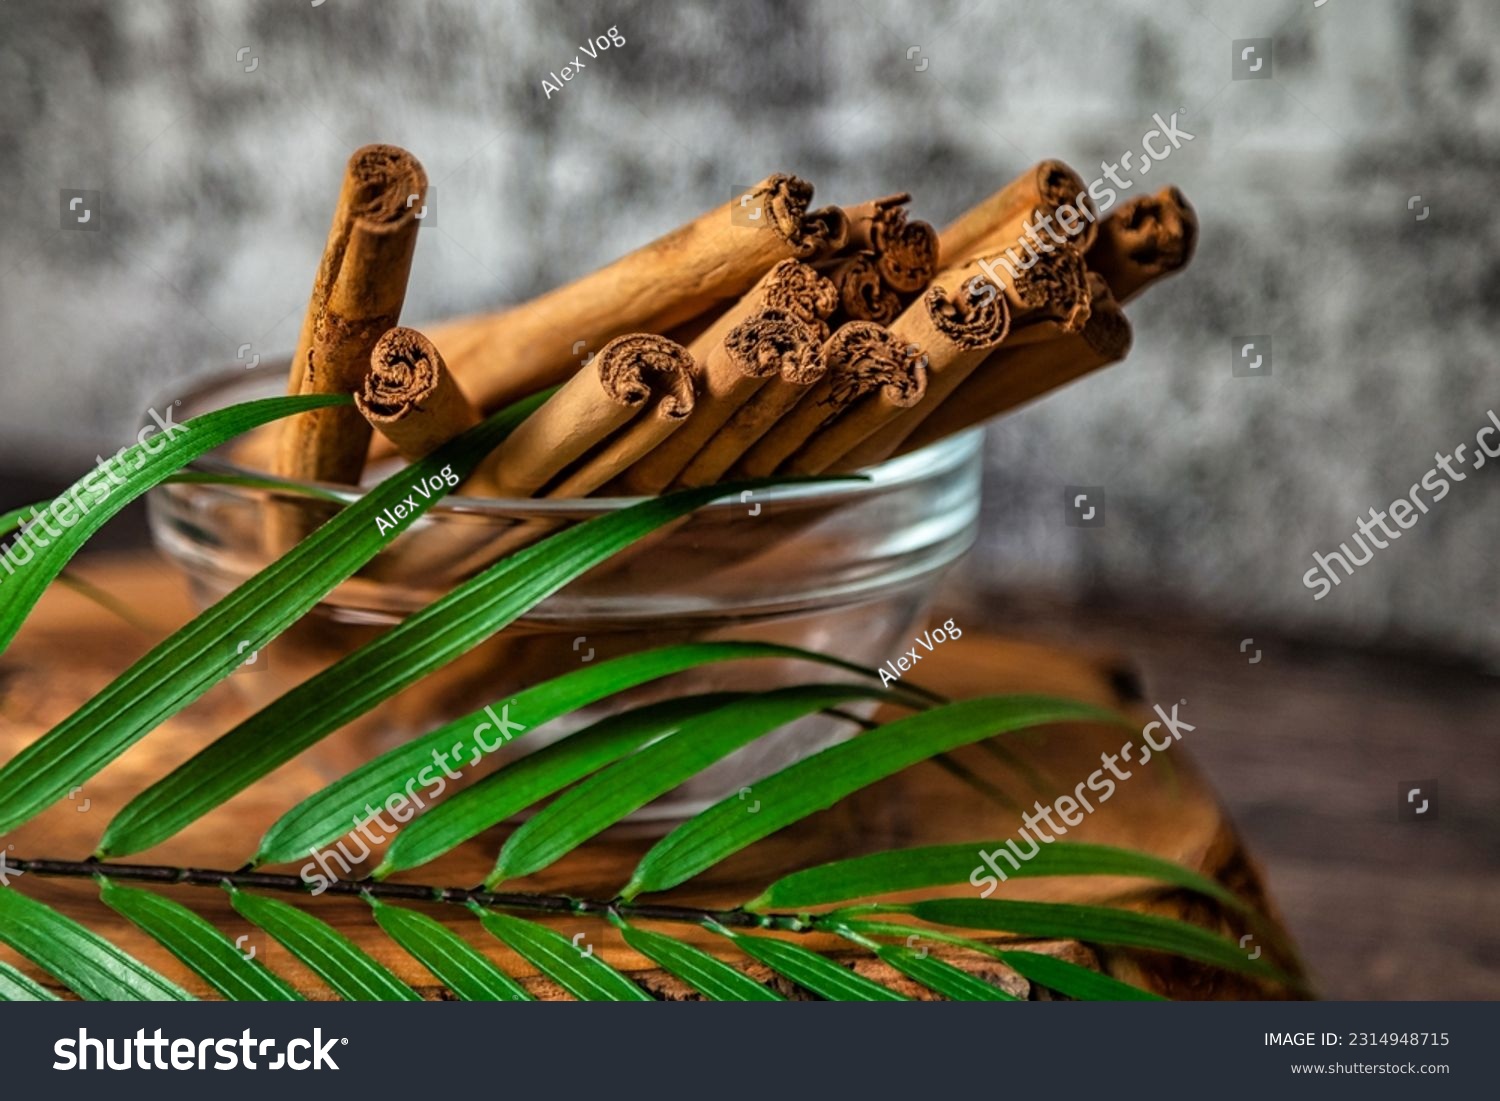 Cinnamon sticks in glass plate with palm leaf on wood board at grey textured wall, rustic style. Still life natural food of ceylon cinnamon sticks. Delicious tasty healthy concept. Copy ad text space #2314948715